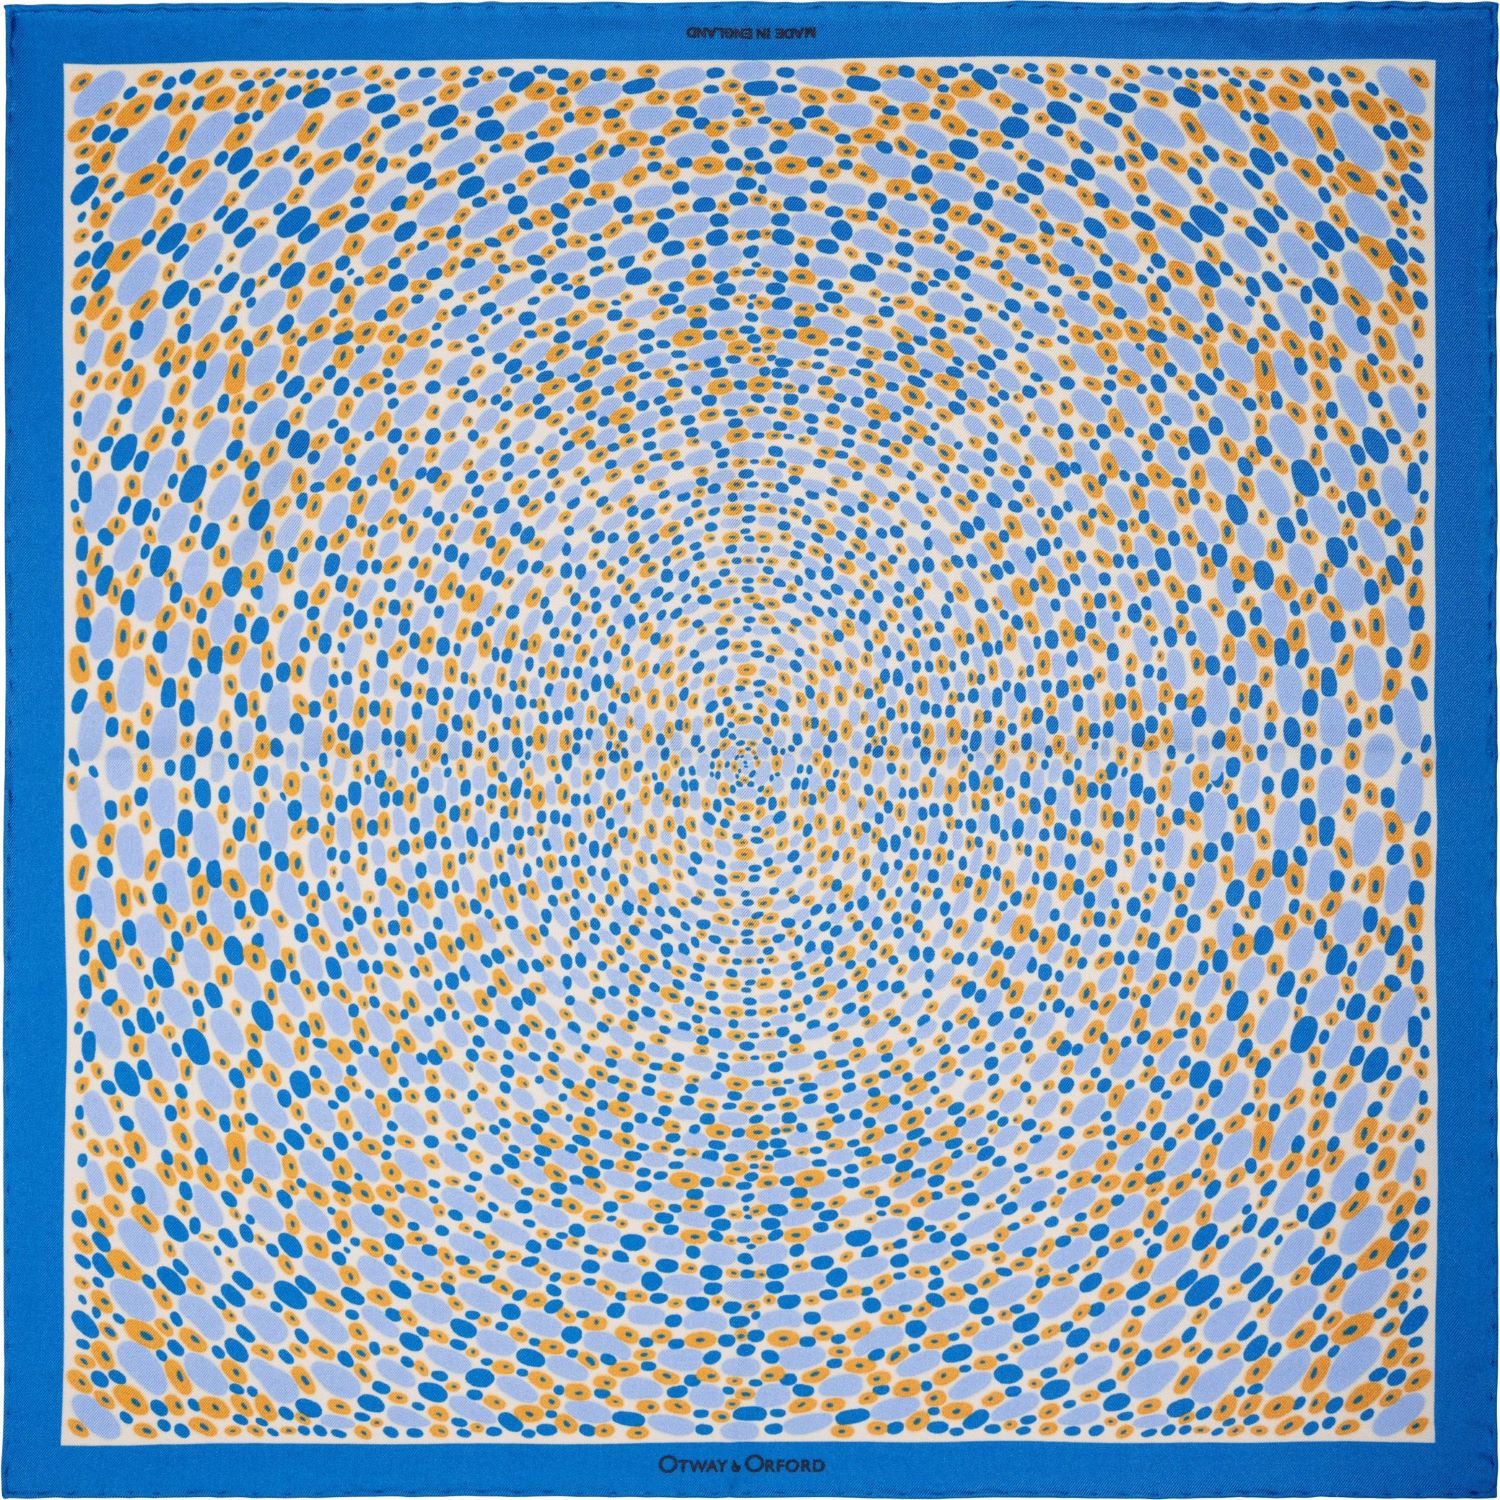 Men’s Gold / Blue / White ’Infinity’ Spotted Silk Pocket Square In Blue, Gold & White. Full-Size. Otway & Orford